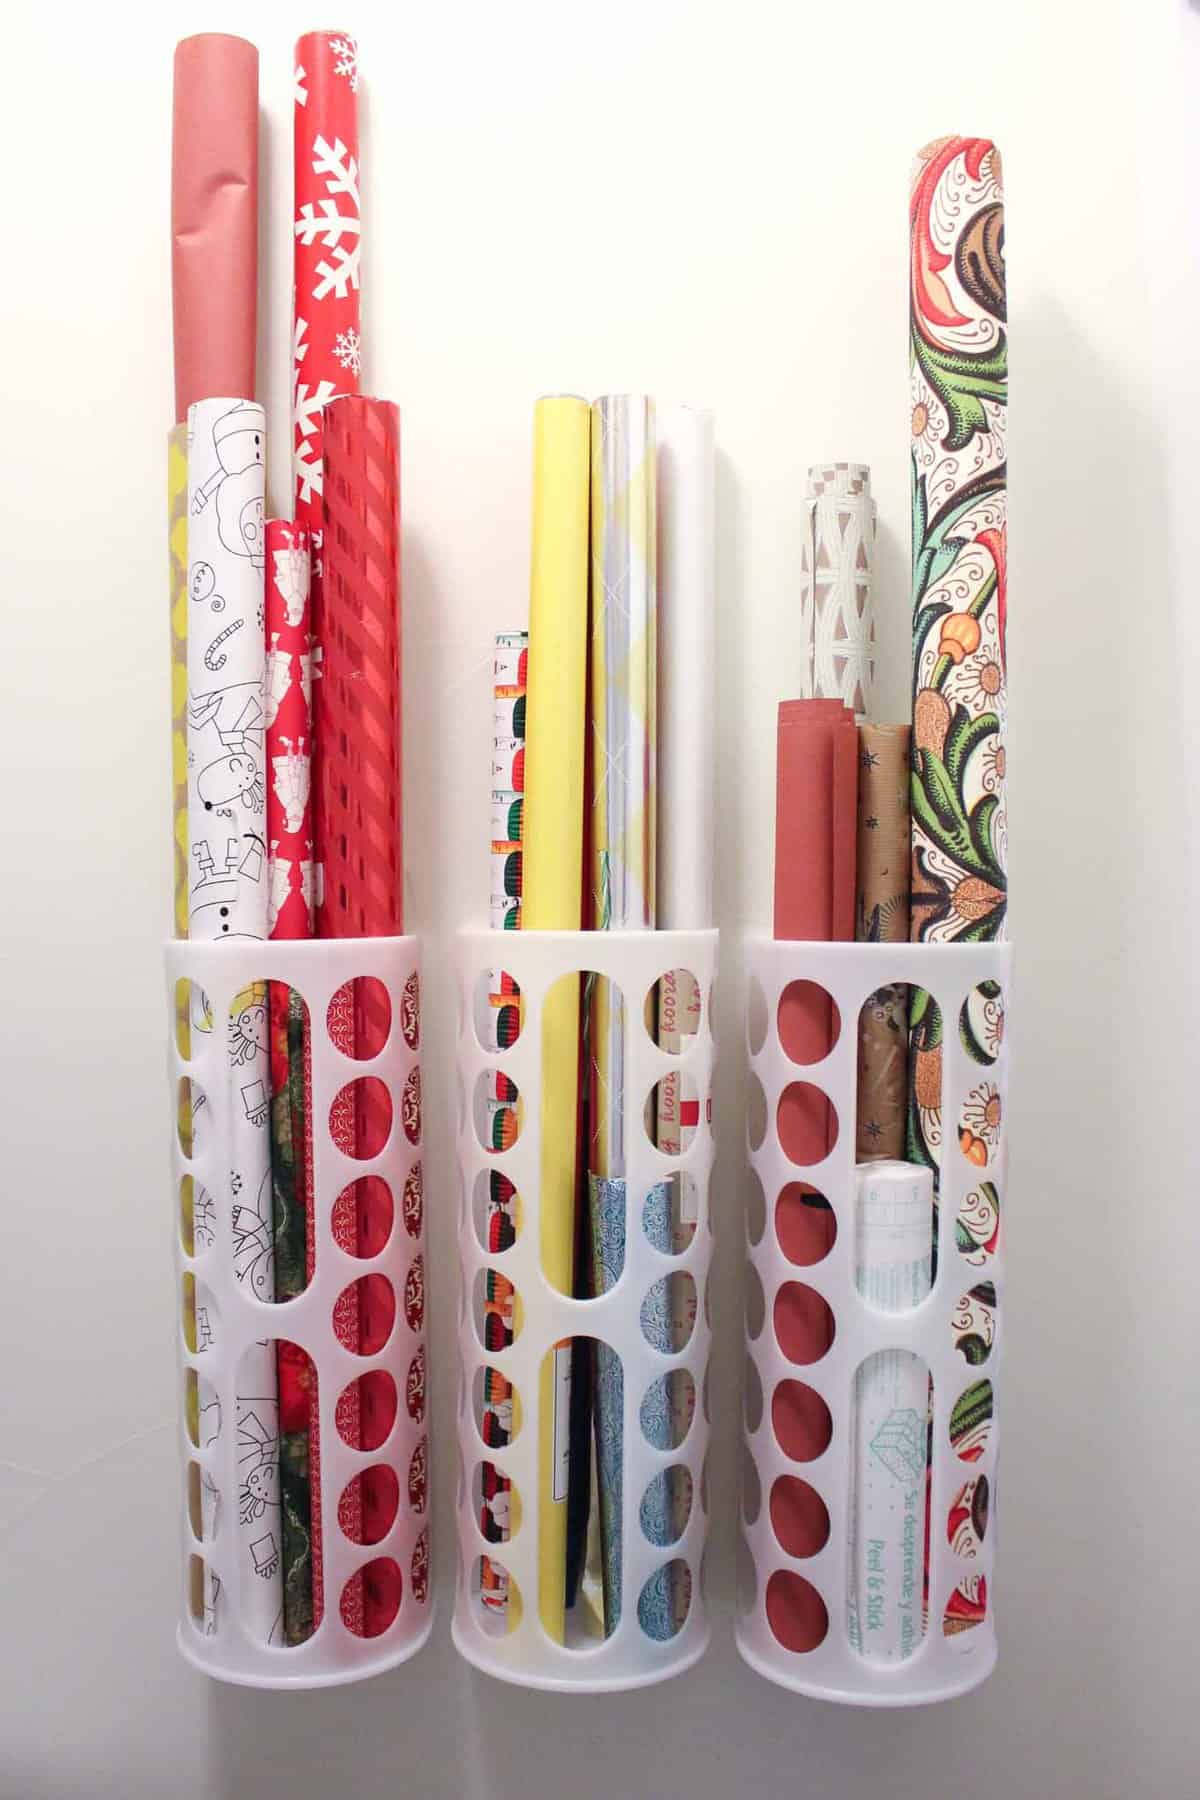 Rolls of wrapping paper stored vertically on a wall using IKEA's Variera plastic bag storage system.